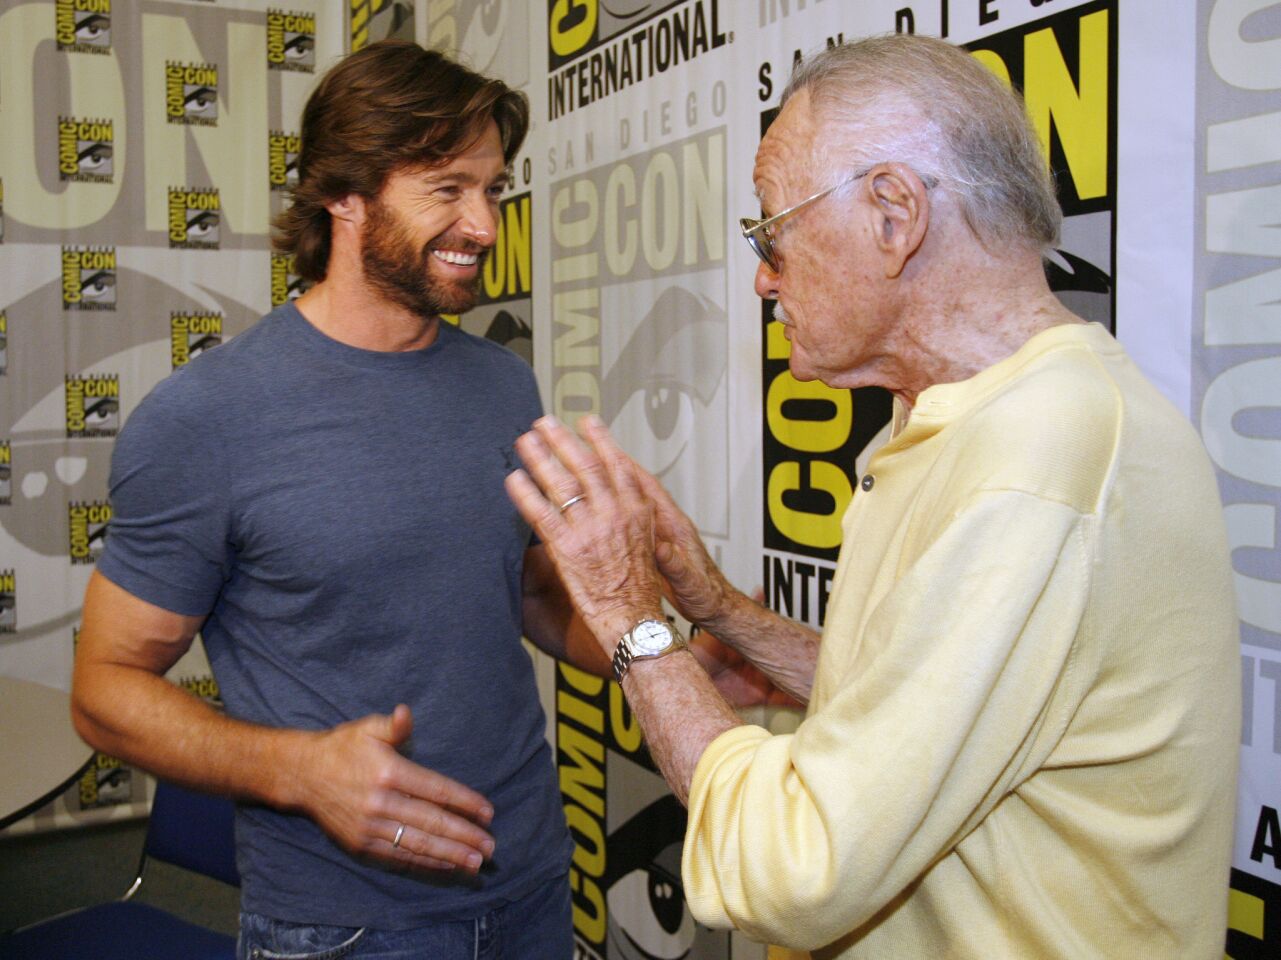 "Wolverine" actor Hugh Jackman, left, talks to legendary comic book creator Stan Lee after an interview at Comic-Con International 2008 in San Diego.